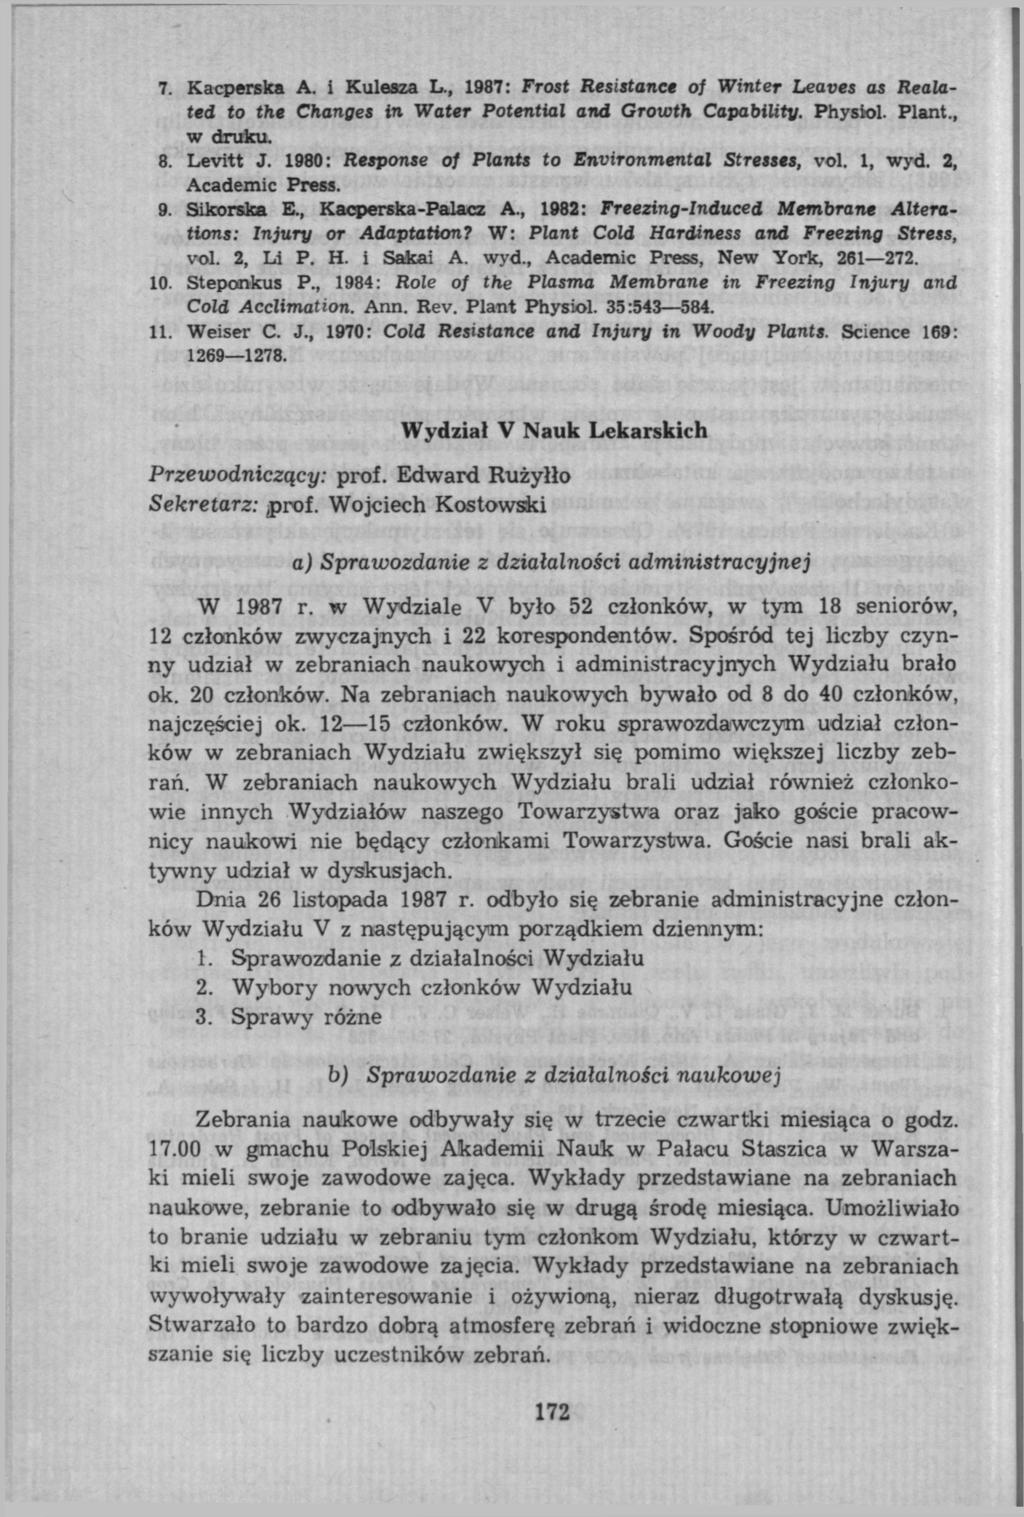 7. Kacperska A. i Kulesza L., 1987: Frost Resistance of Winter Leaves as Realated to the Changes in Water Potential and Growth Capability. Physiol. Plant., w druku. 8. Levitt J.